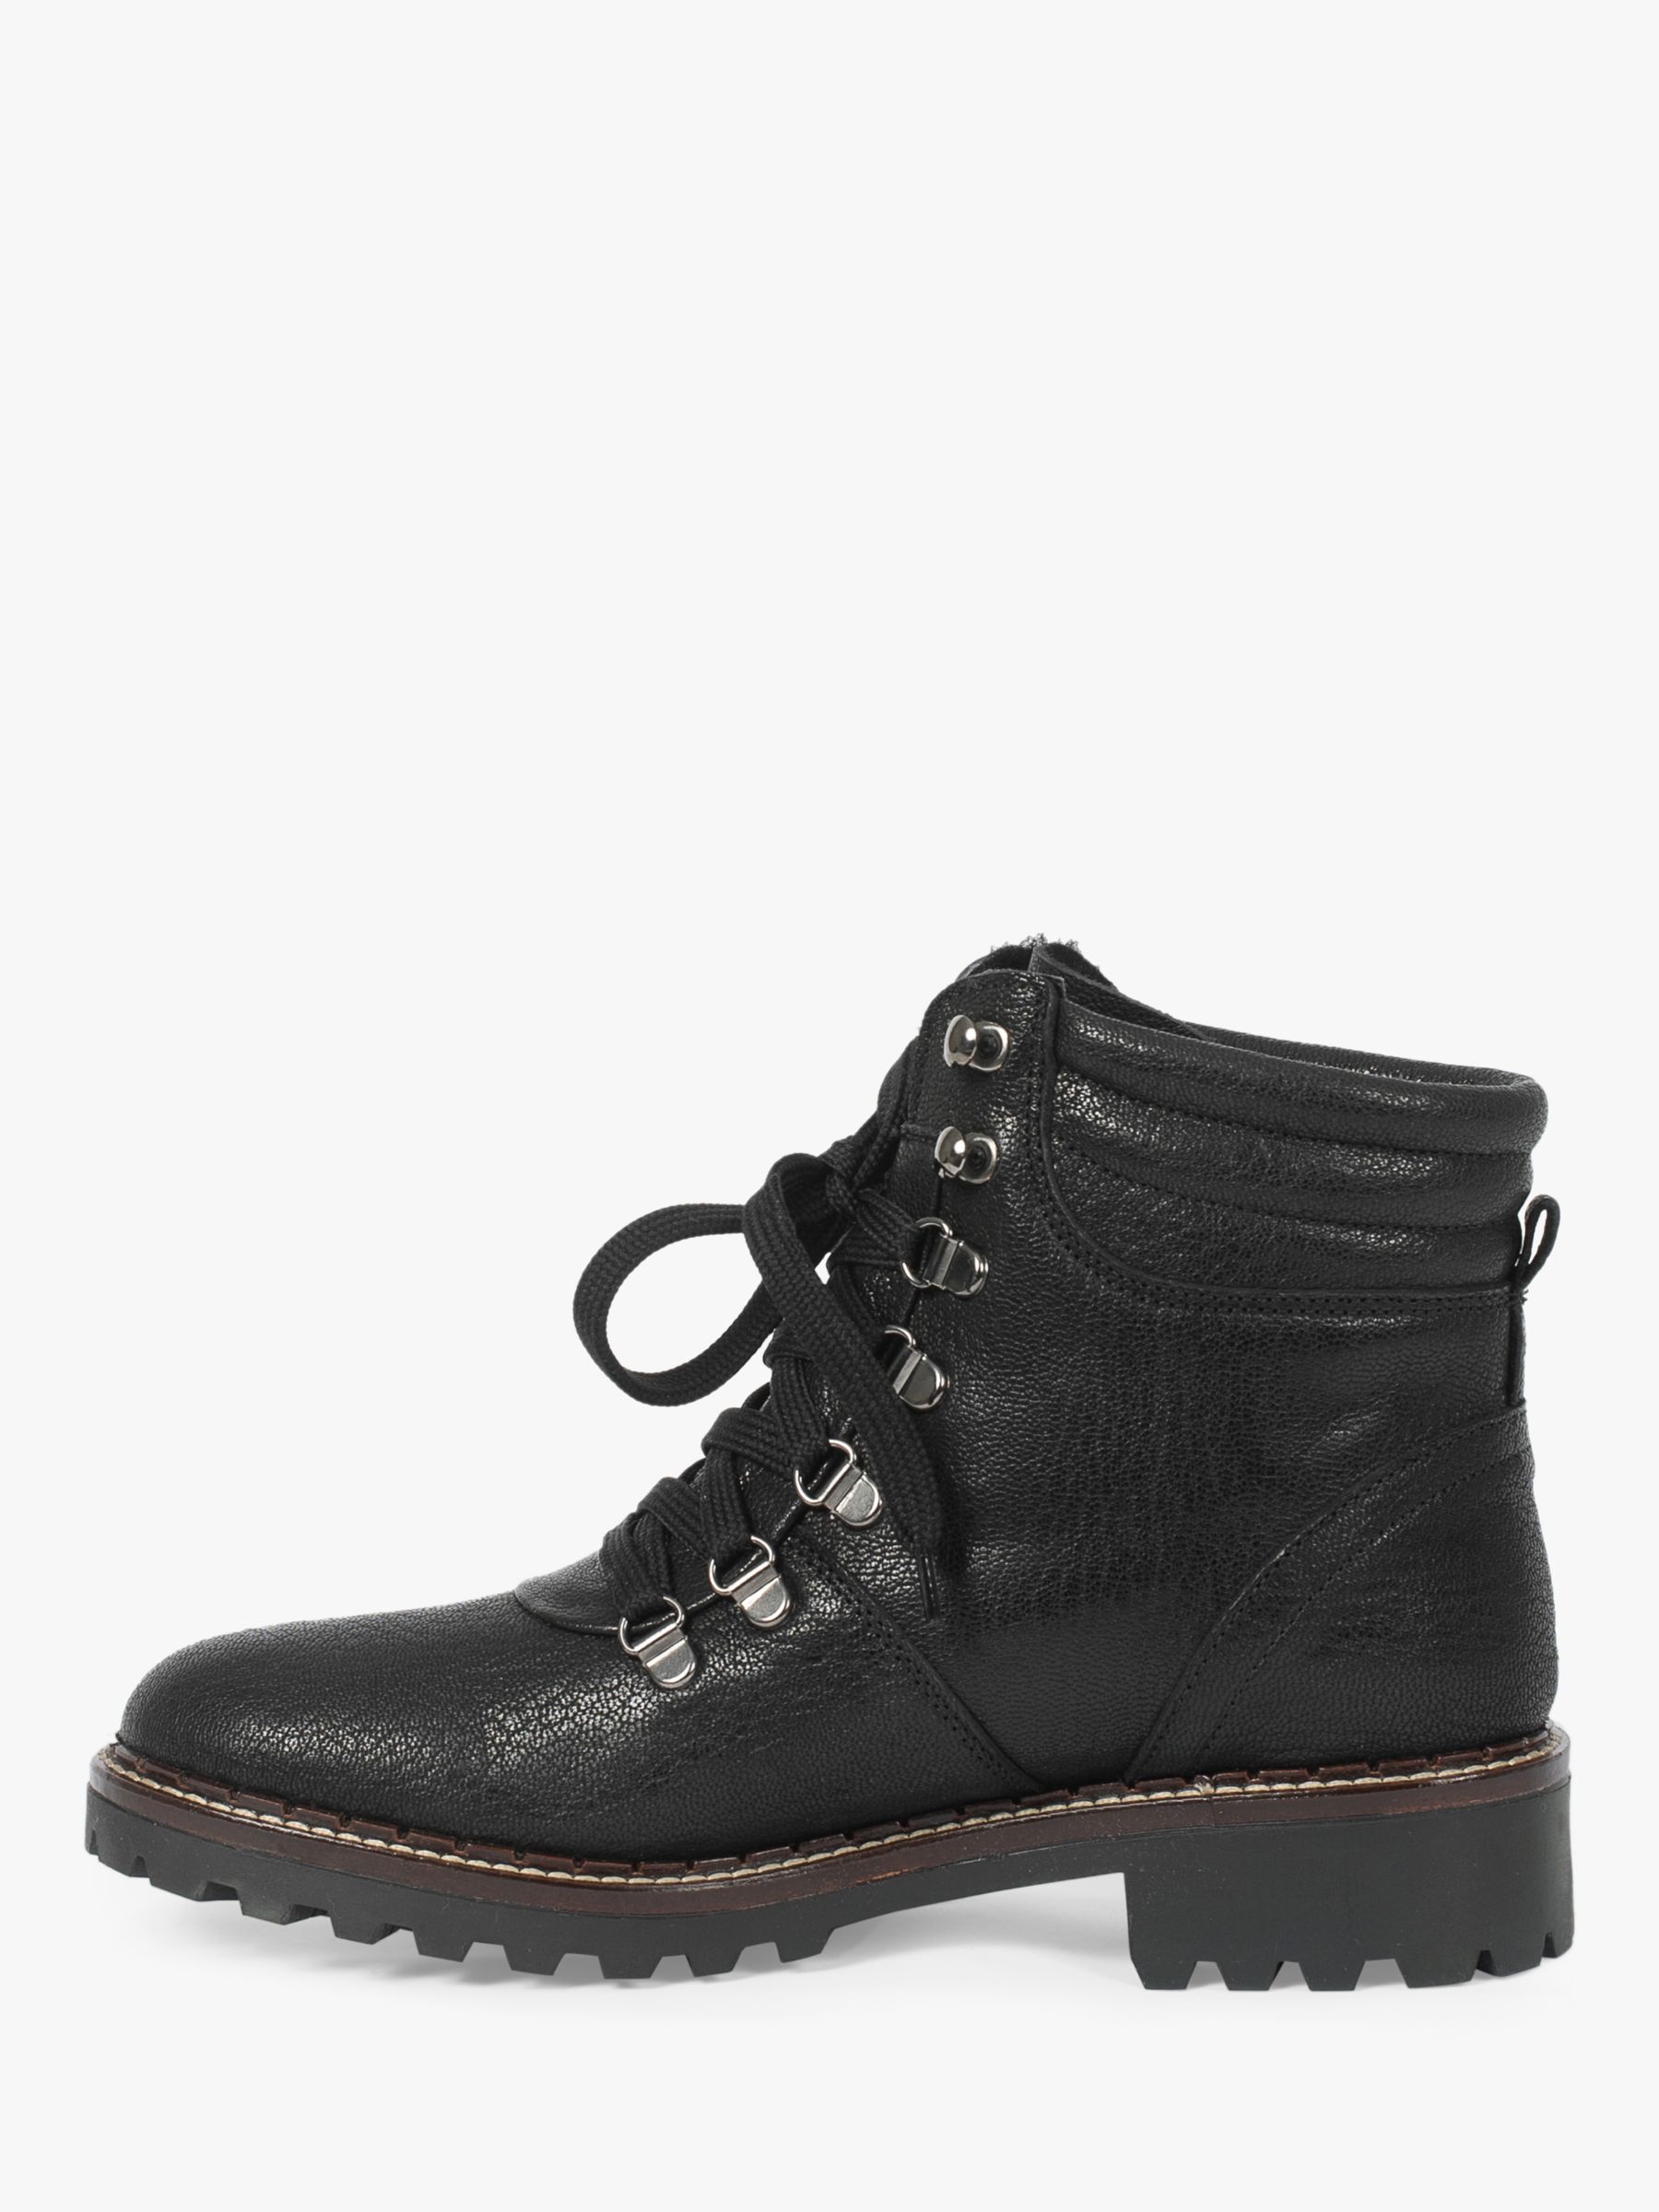 Celtic & Co. Leather Hiker Boots at John Lewis & Partners